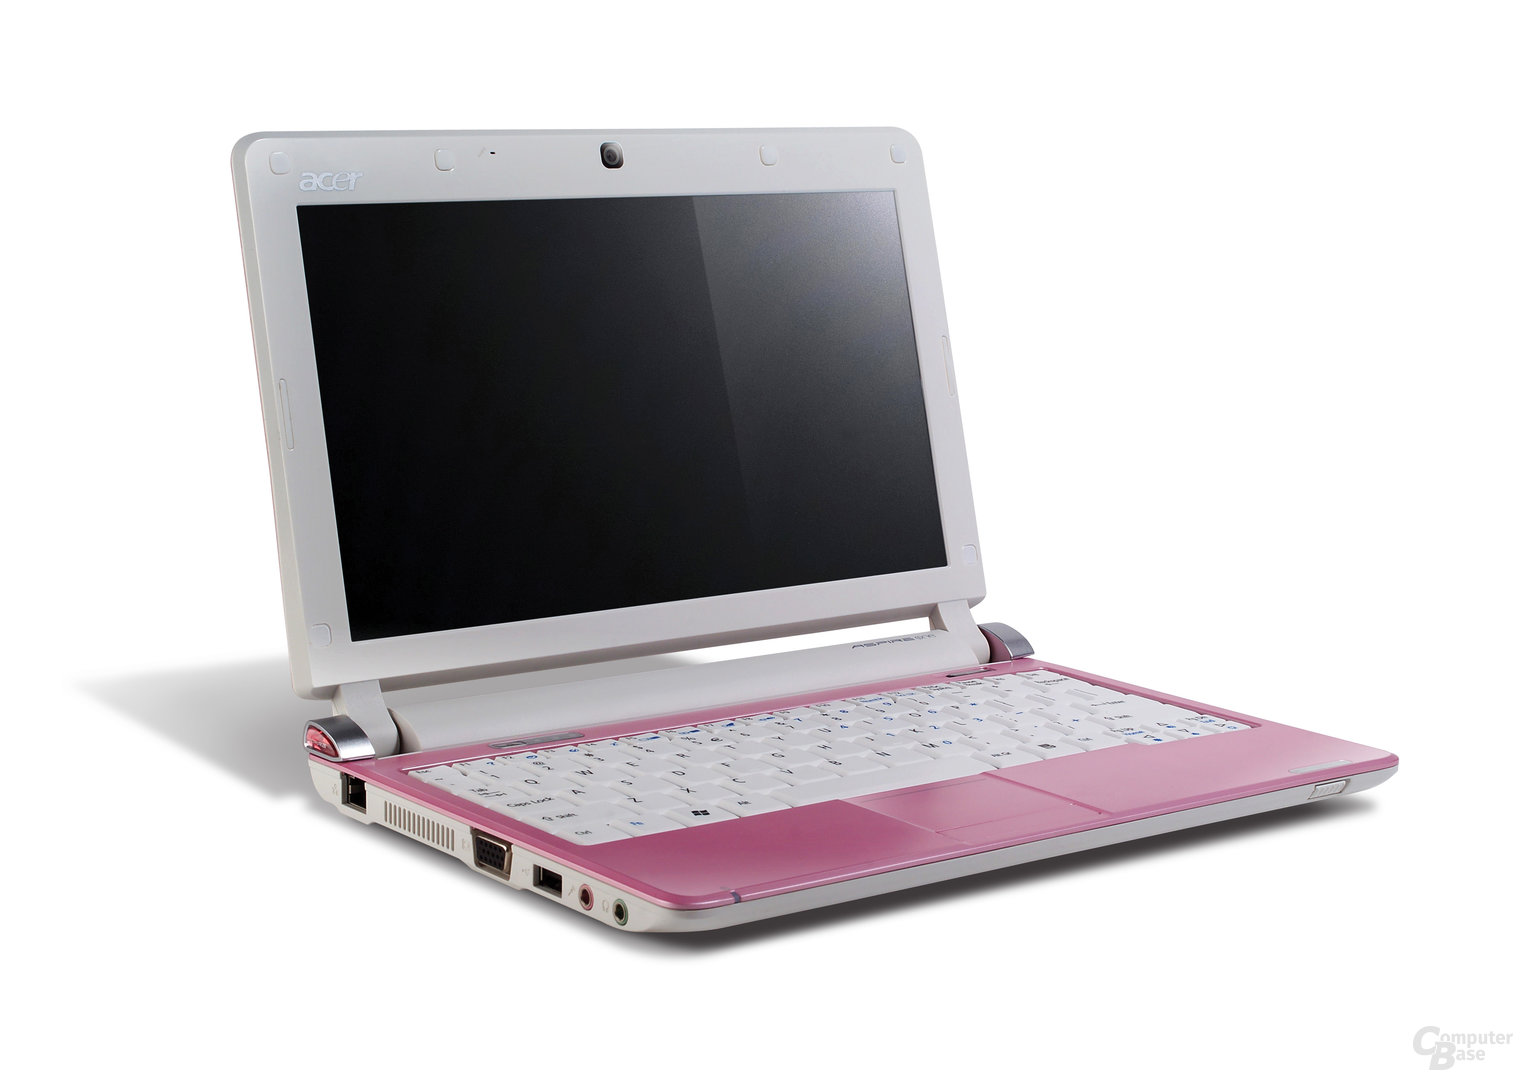 Acer Aspire one D250 in pink